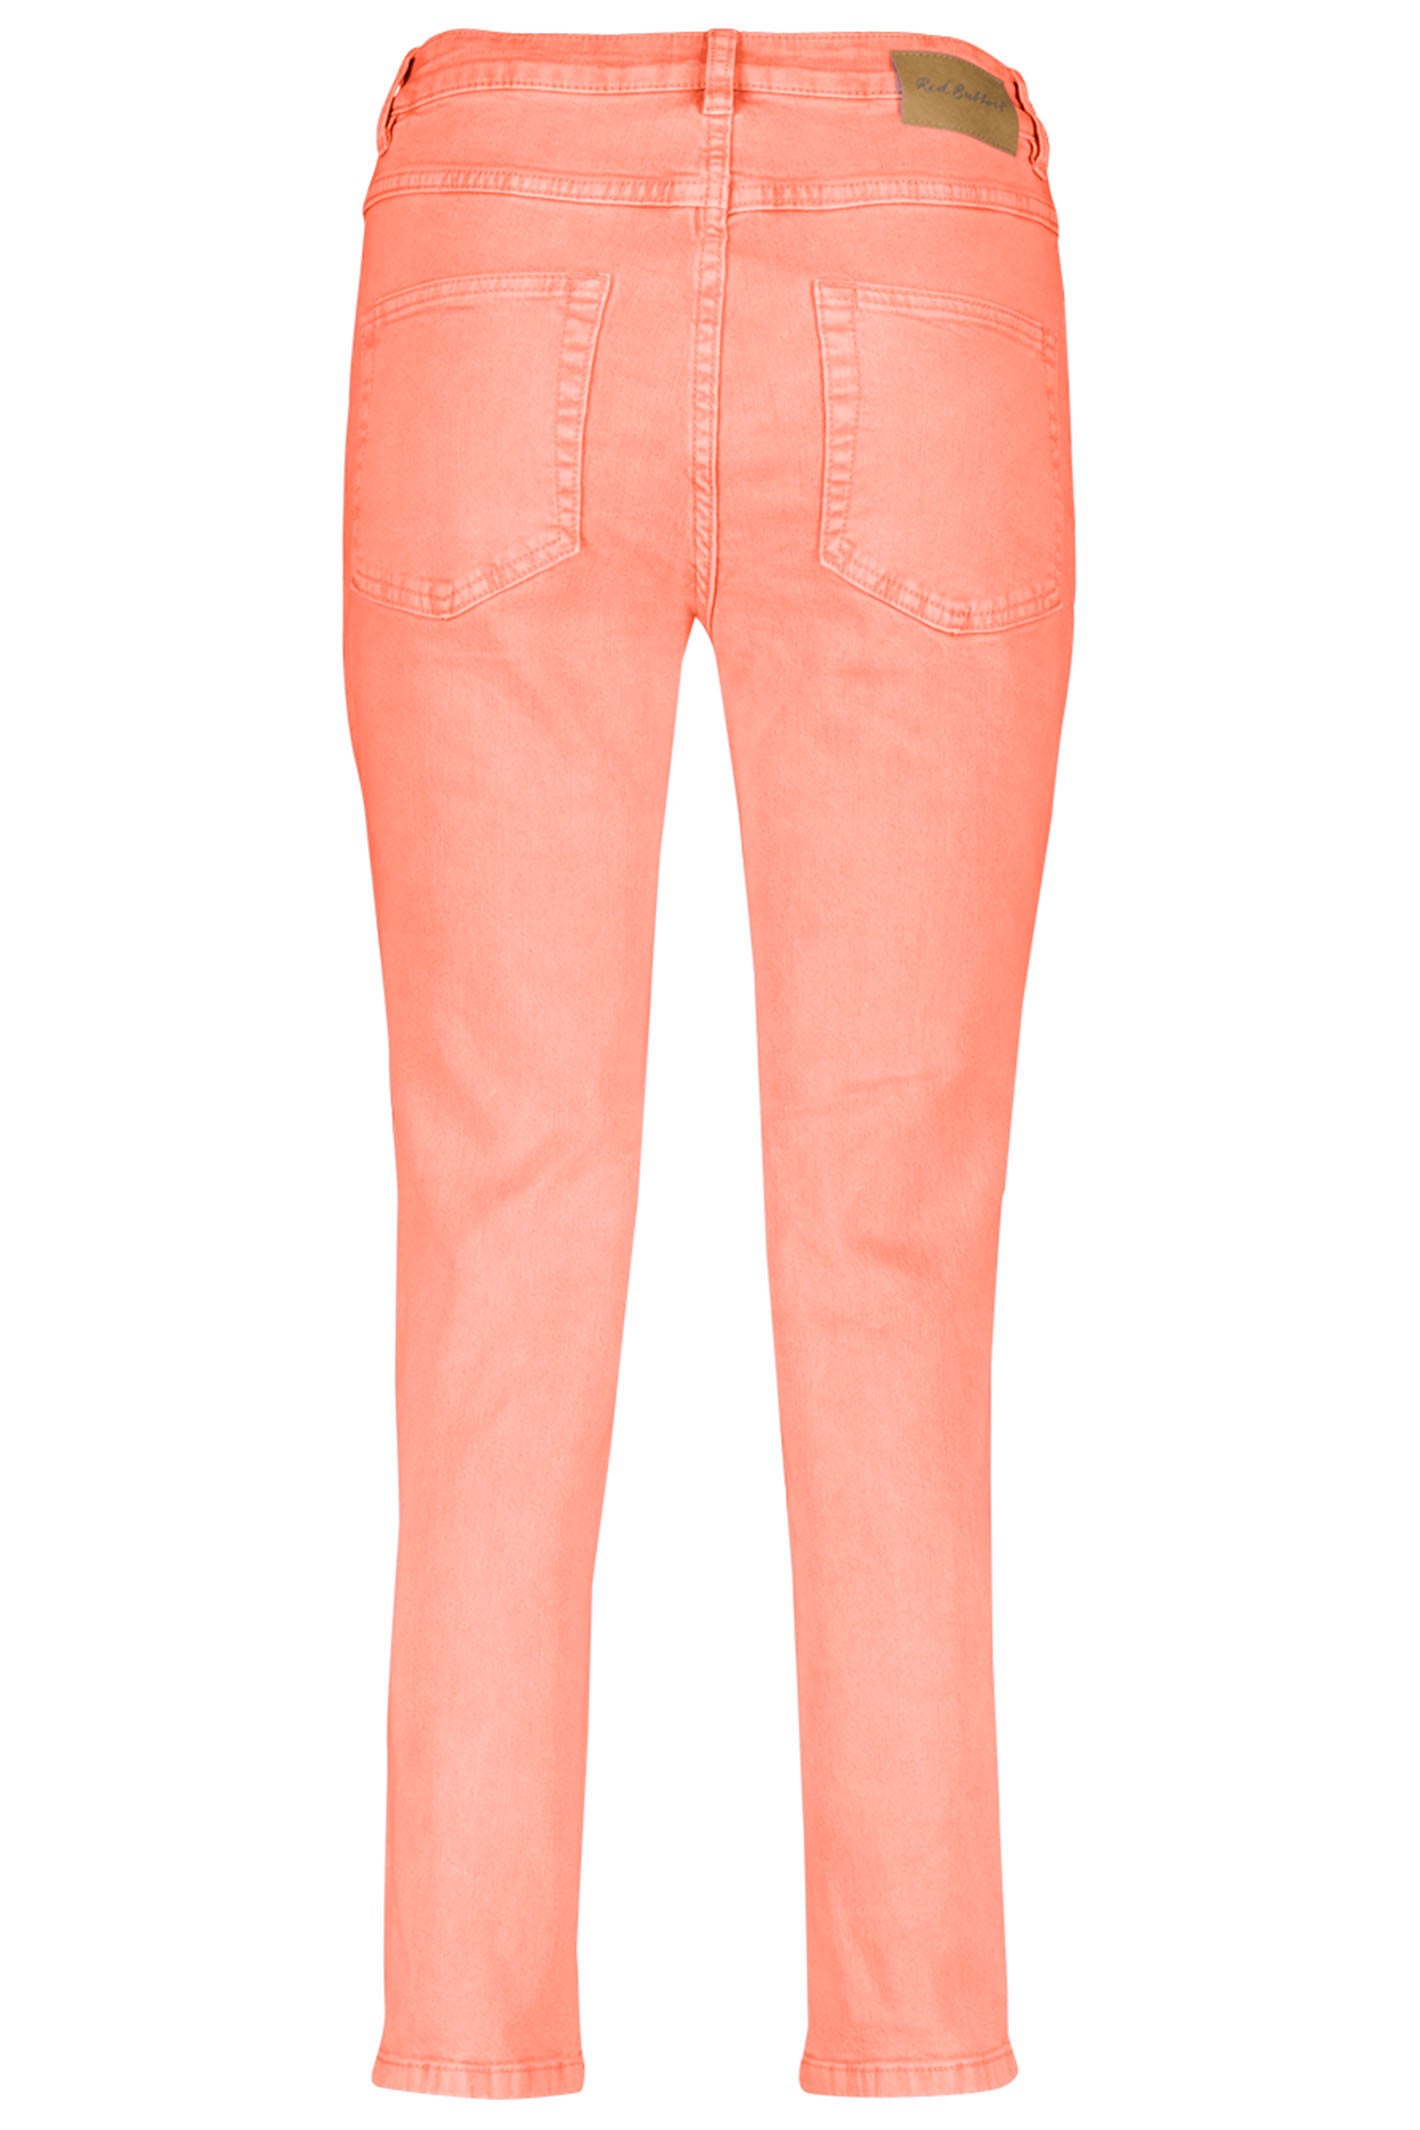 Women's The Rockstar Mid-Rise Skinny Pop-Color Jeans | Old Navy